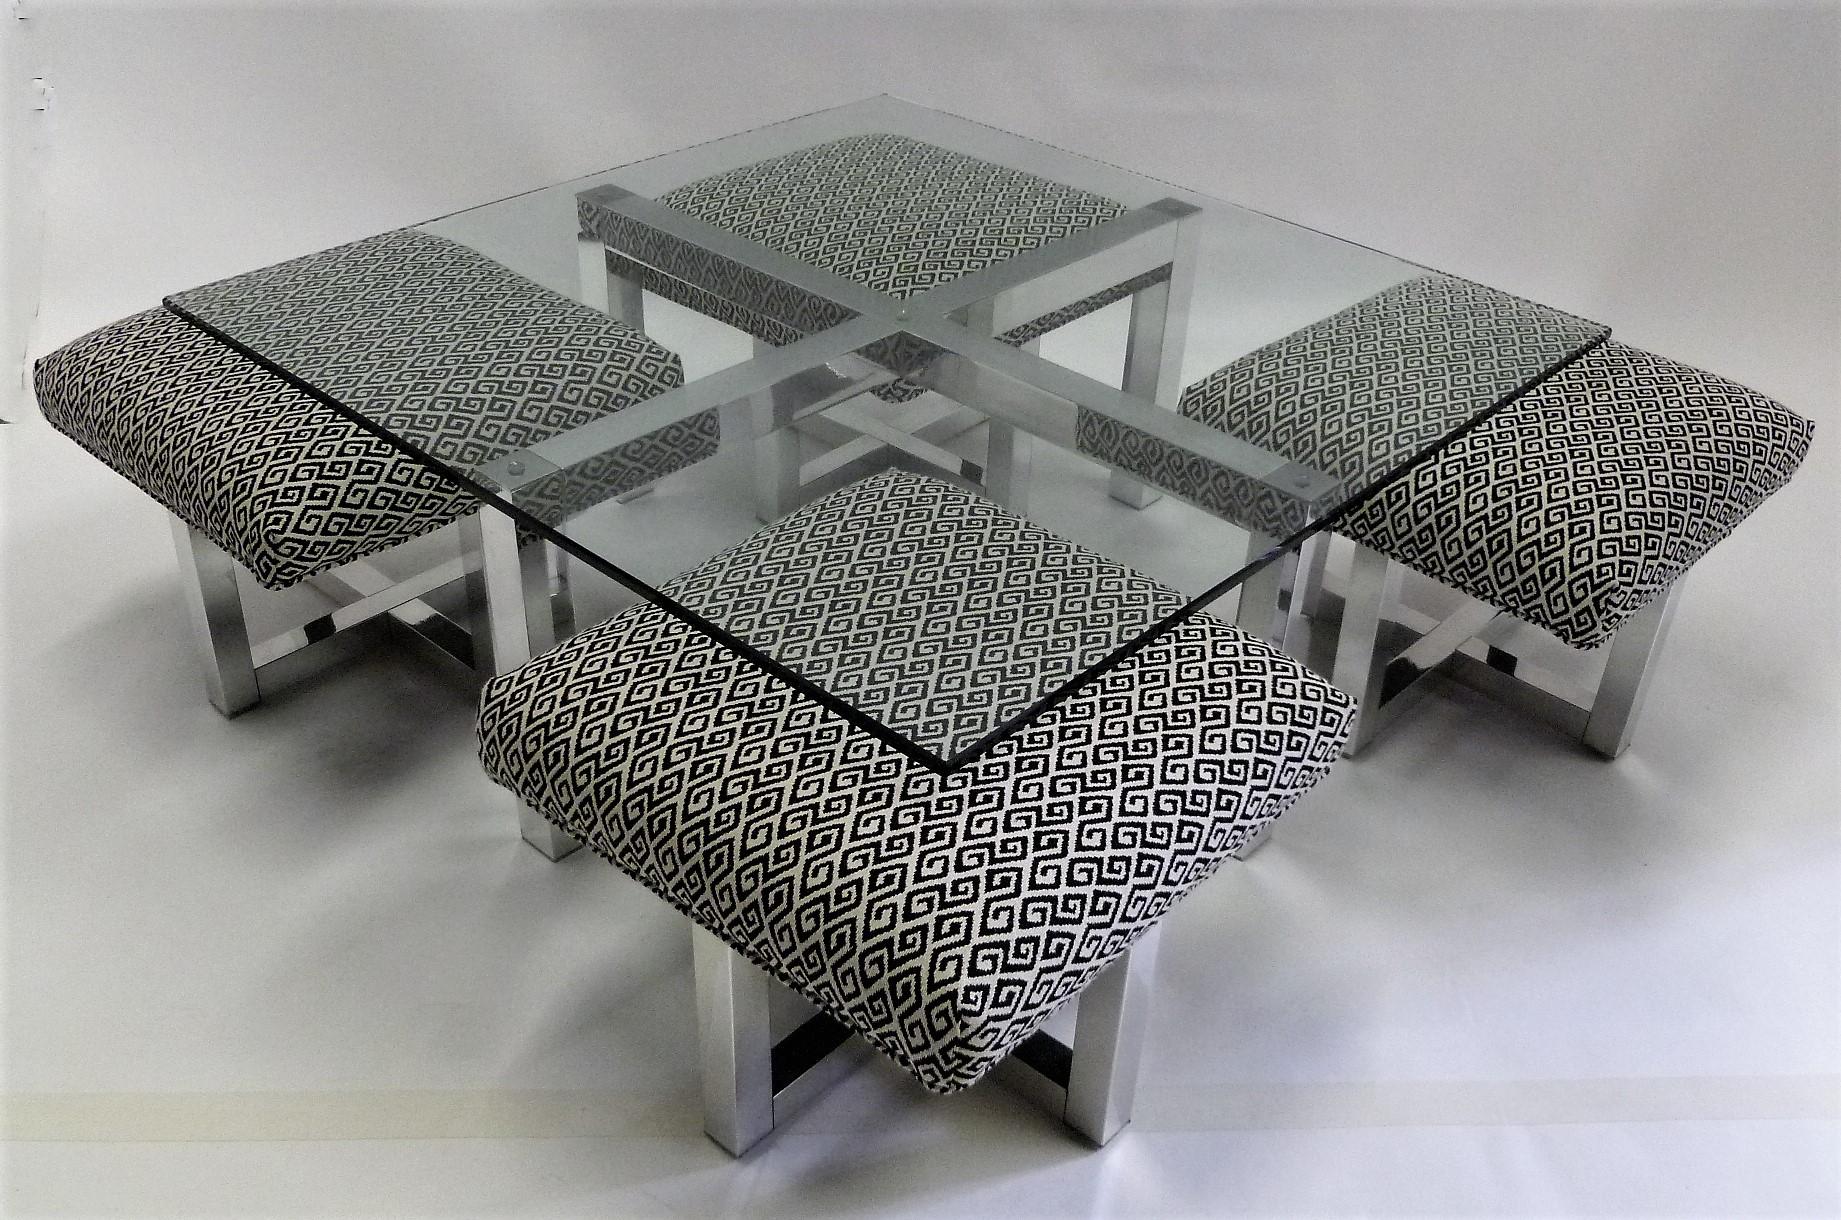 Reduced from $3,800.....Unique 1960s Glass topped polished aluminum coffee table with nesting stools or ottomans in the style of Milo Baughman. The Table with a polished aluminum X-base and new 1/2 inch square glass top, with four stools on polished